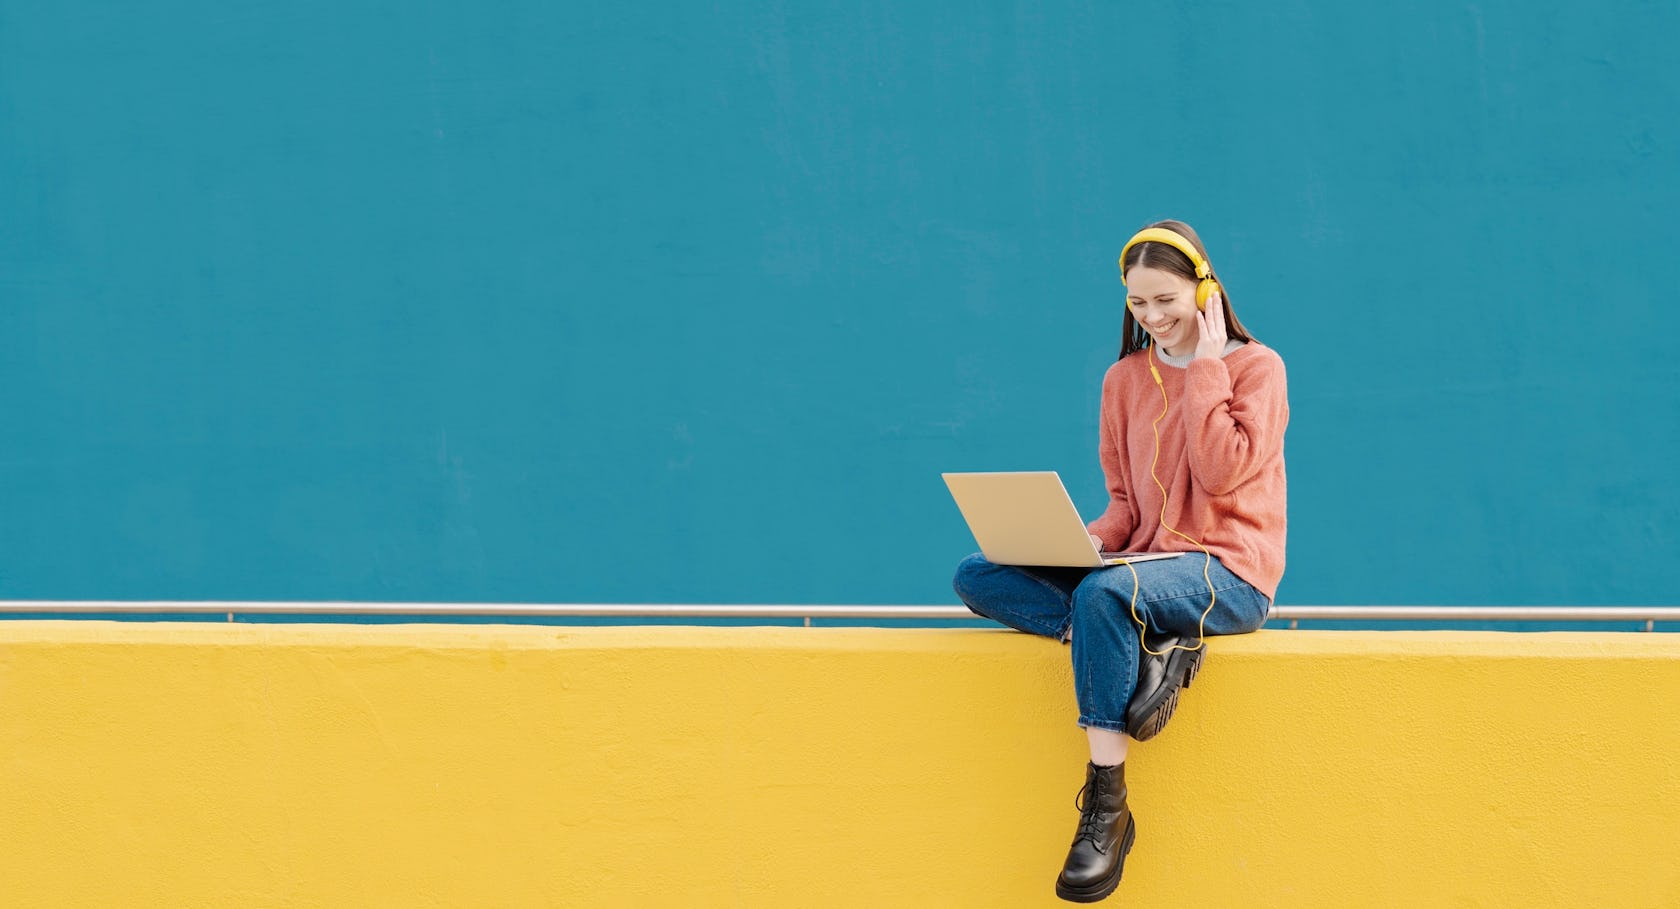 young woman against a bright background on a laptop with headphones on - reading richardson's most recent social media posts